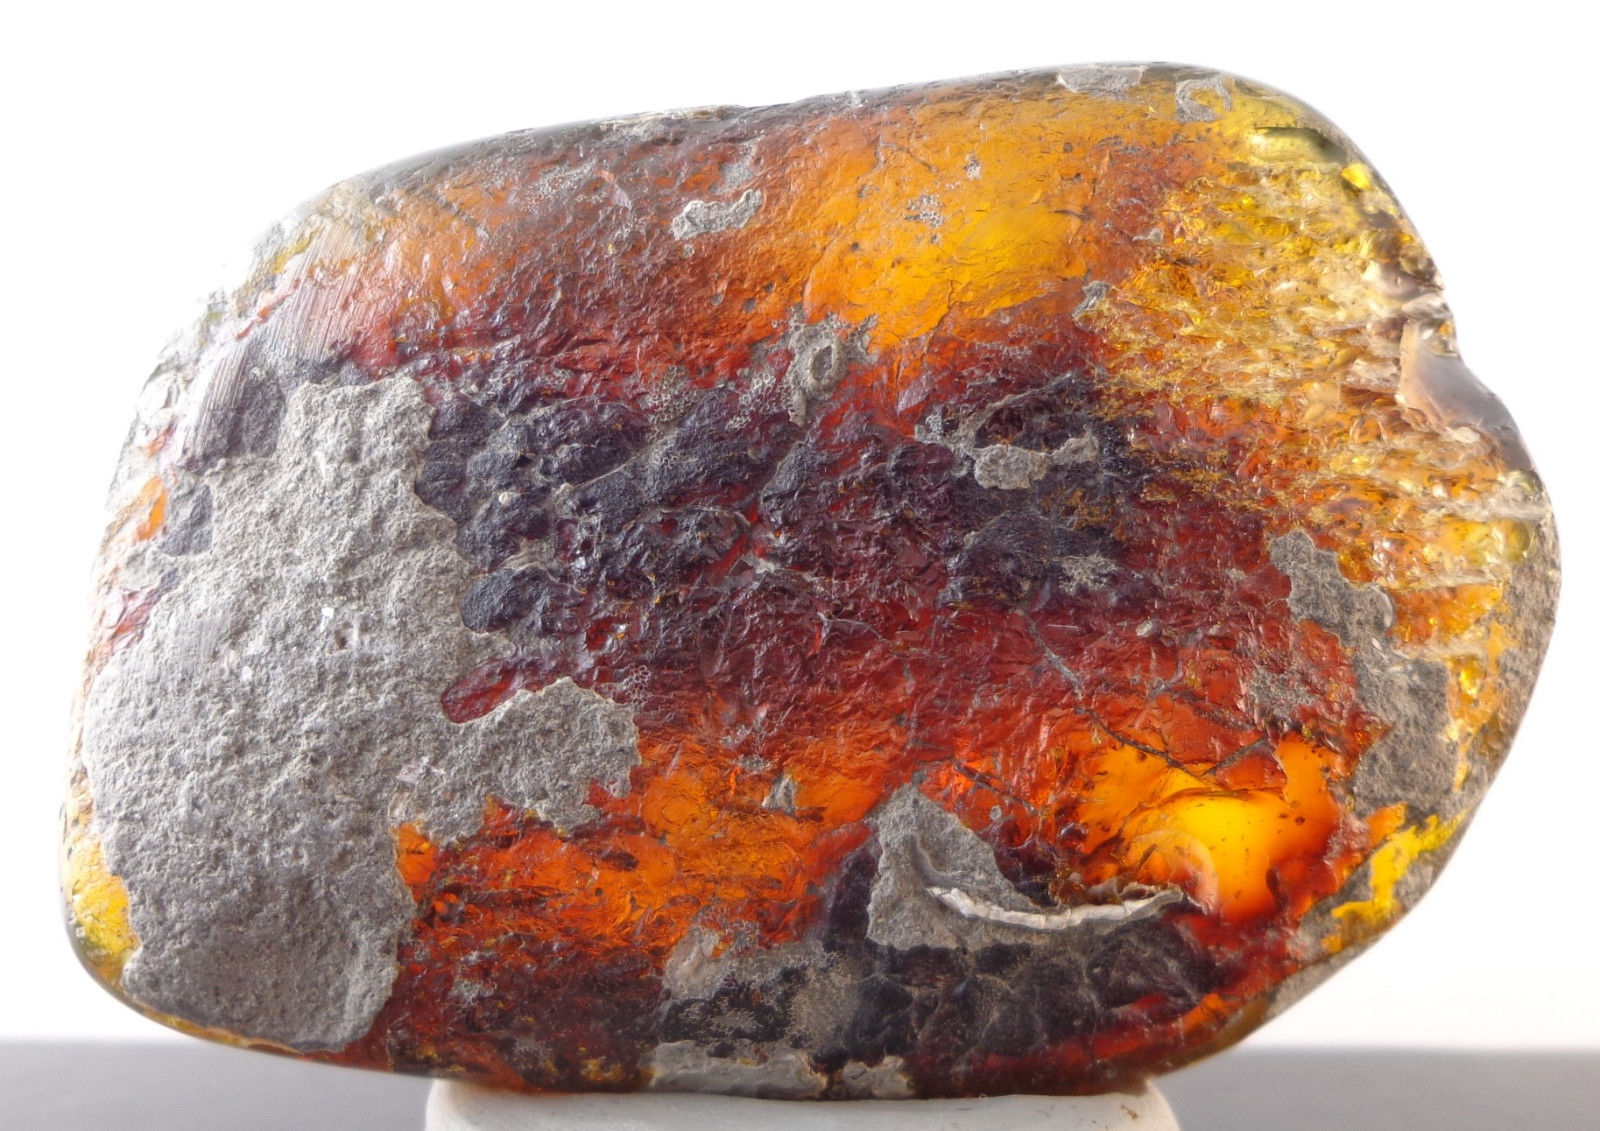 Blue Green Mexican Amber Resin Fossil Top Polished with Moss Inclusion -  Mayan Copal